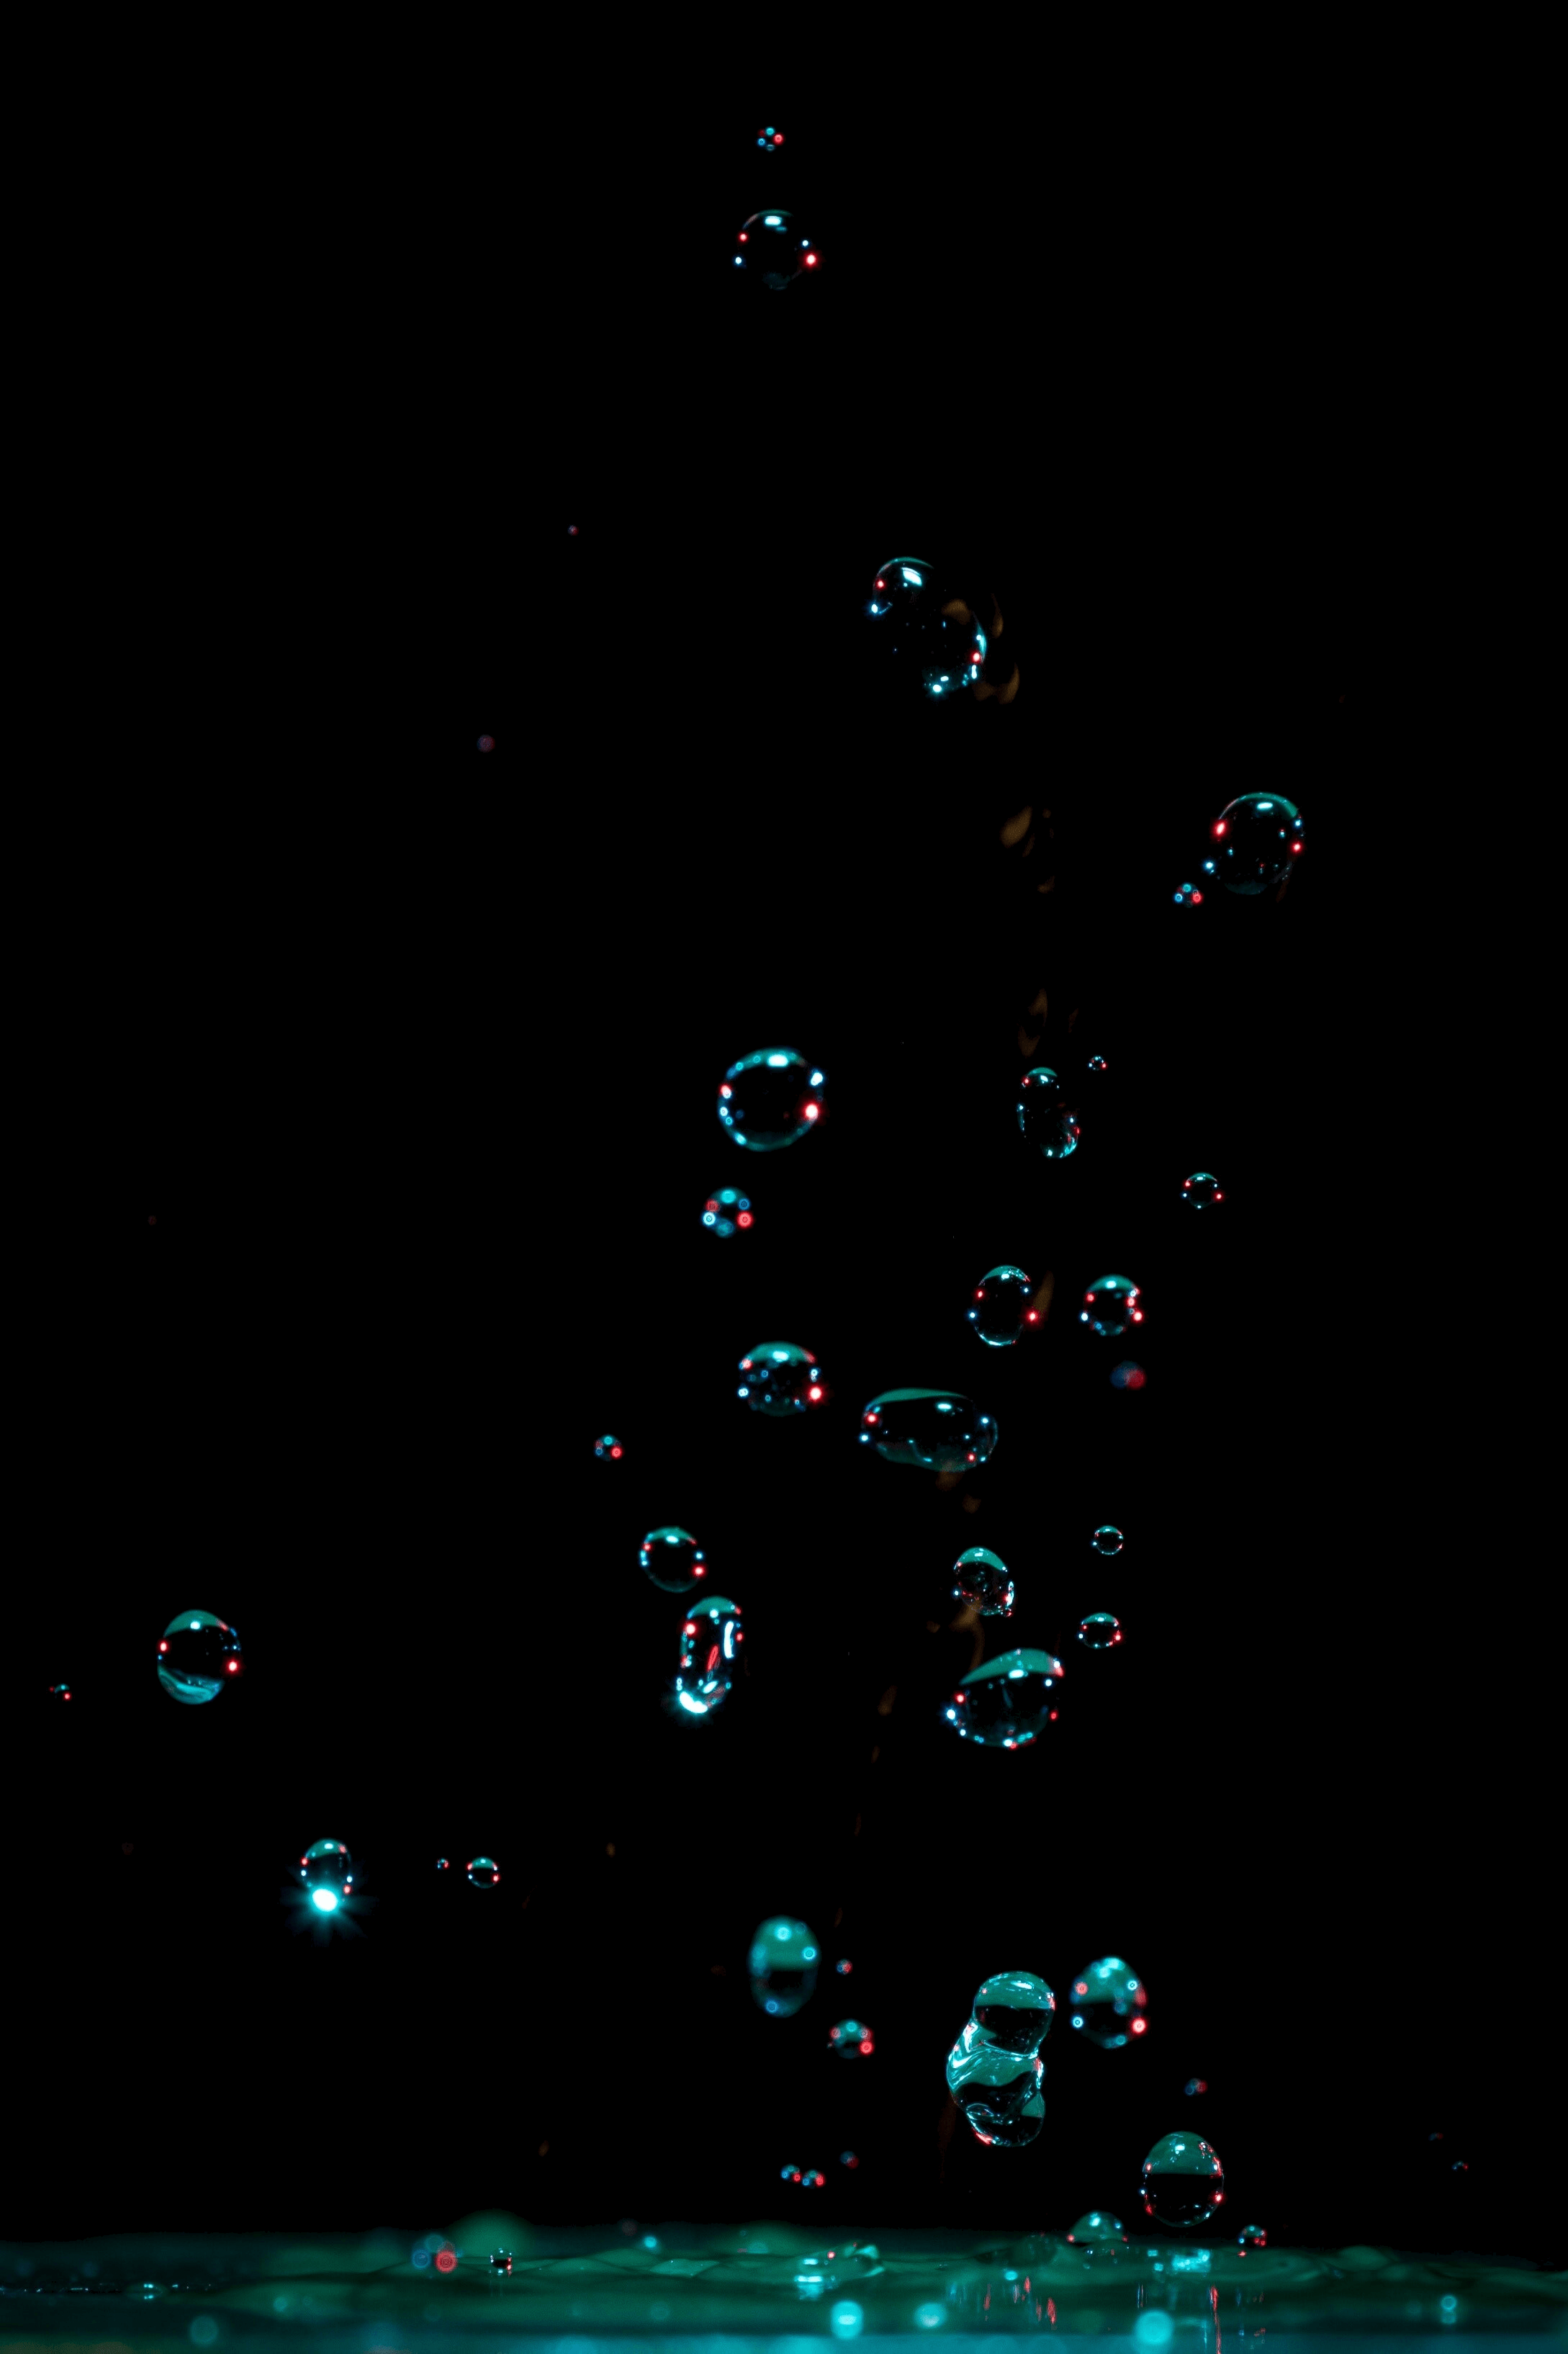 True black and OLED optimized iPhone 11 Pro wallpapers